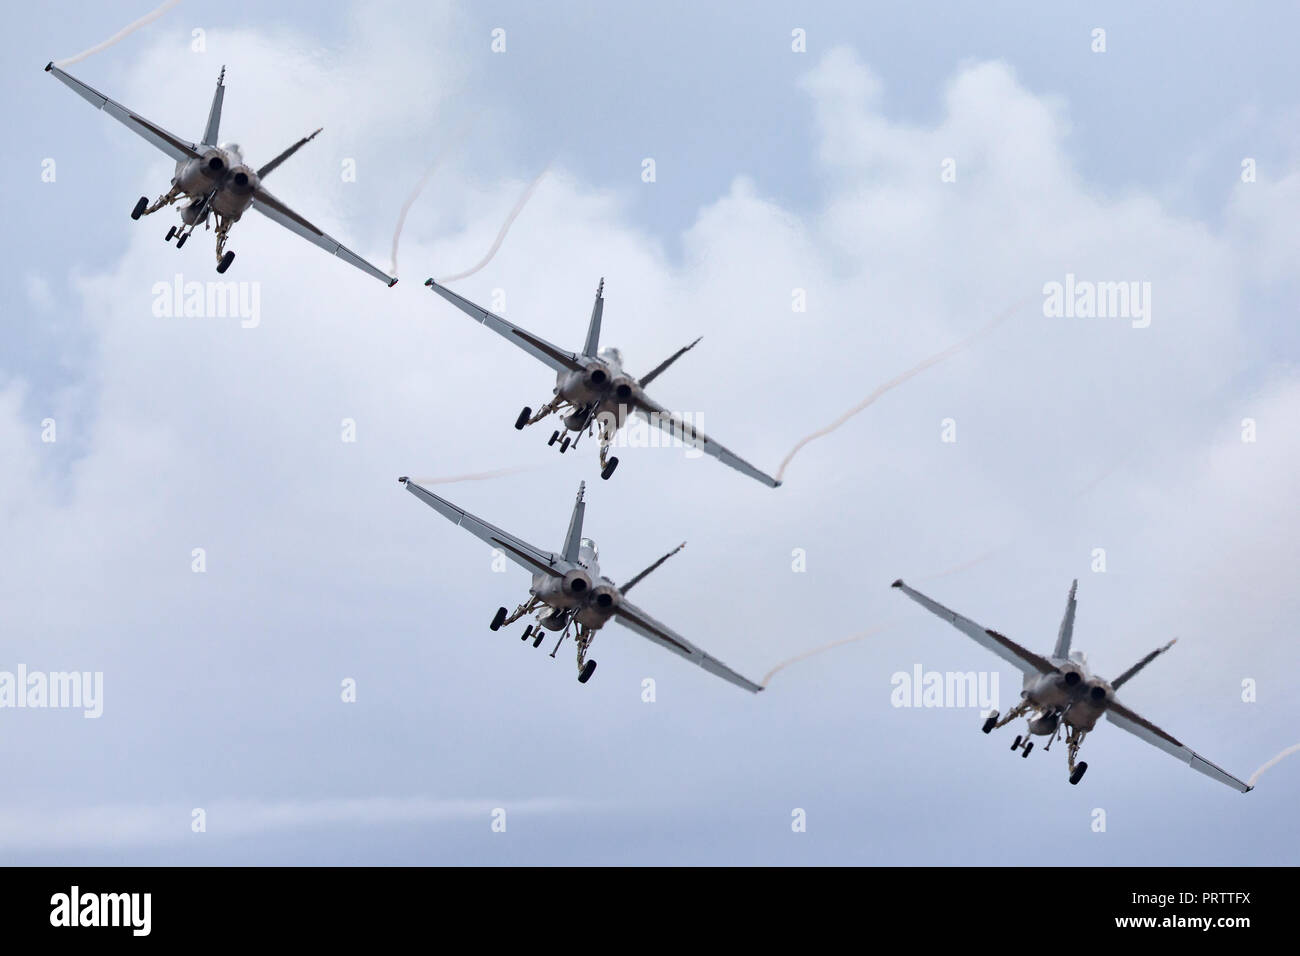 Four Royal Australian Air Force (RAAF) Boeing F/A-18F Super Hornet multirole fighter aircraft flying in formation. Stock Photo